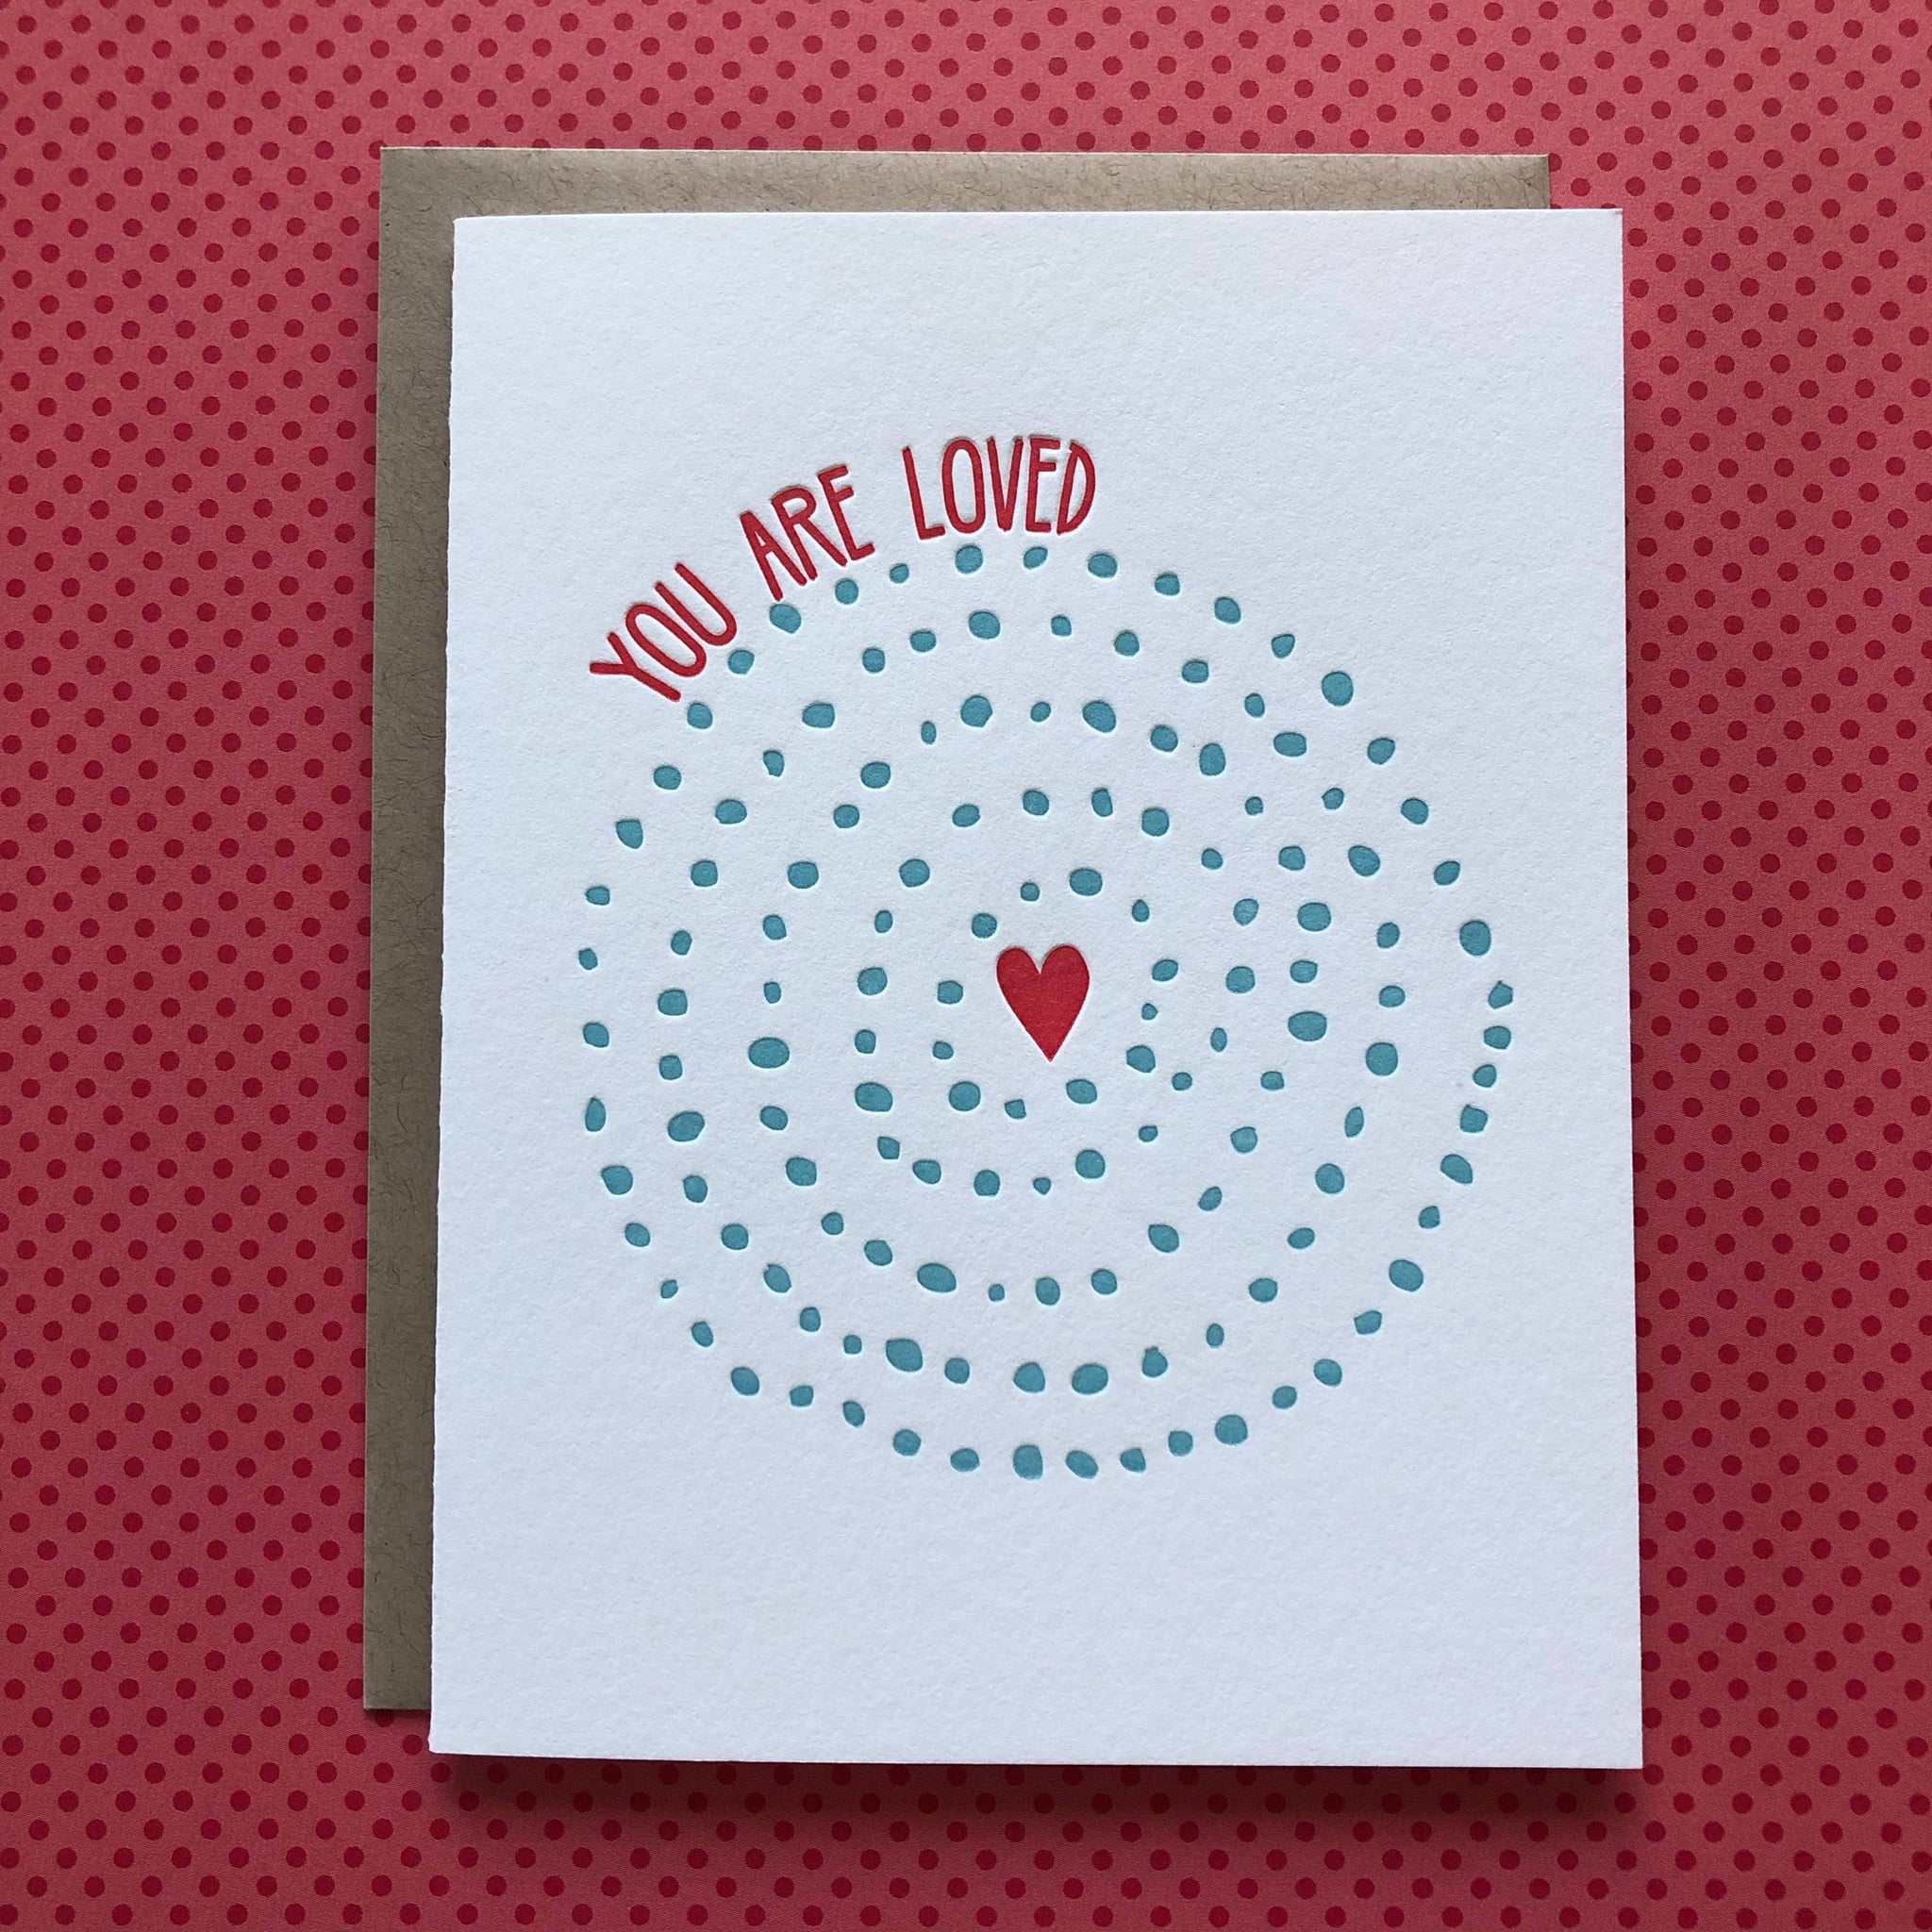 You are Loved - letterpress card